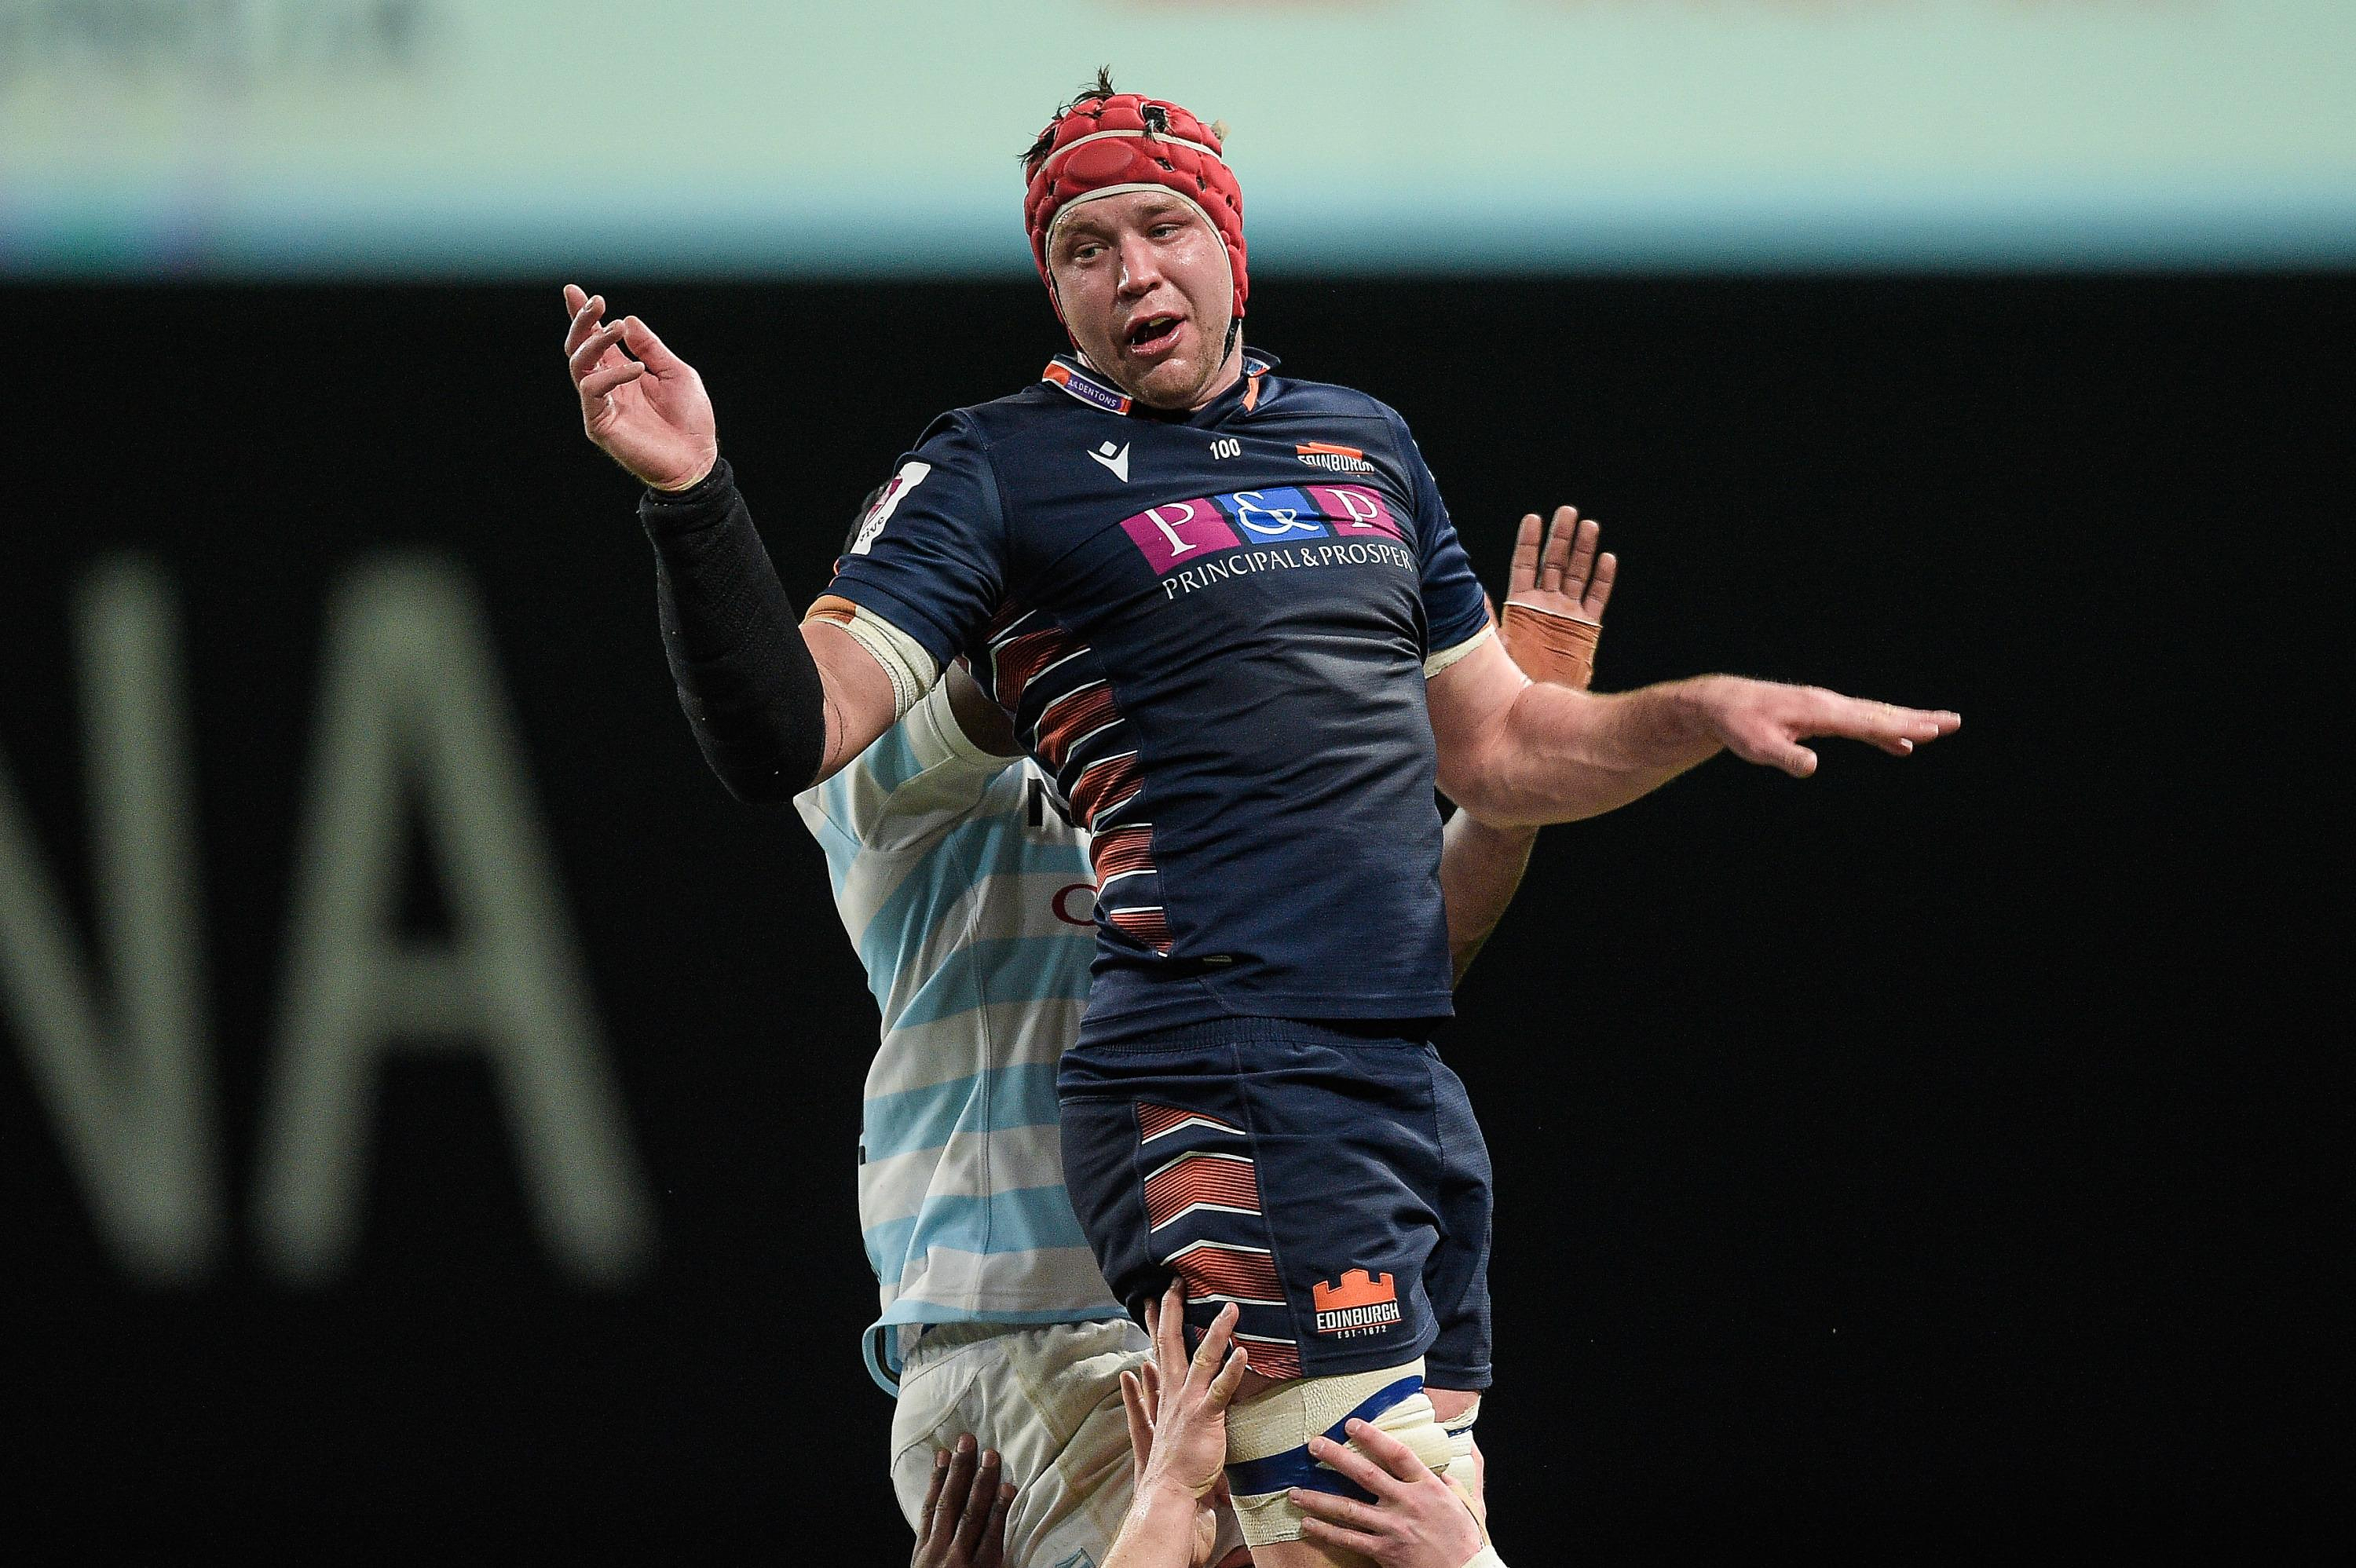 Six Nations: Scotsman Gilchrist will miss the start of the Tournament